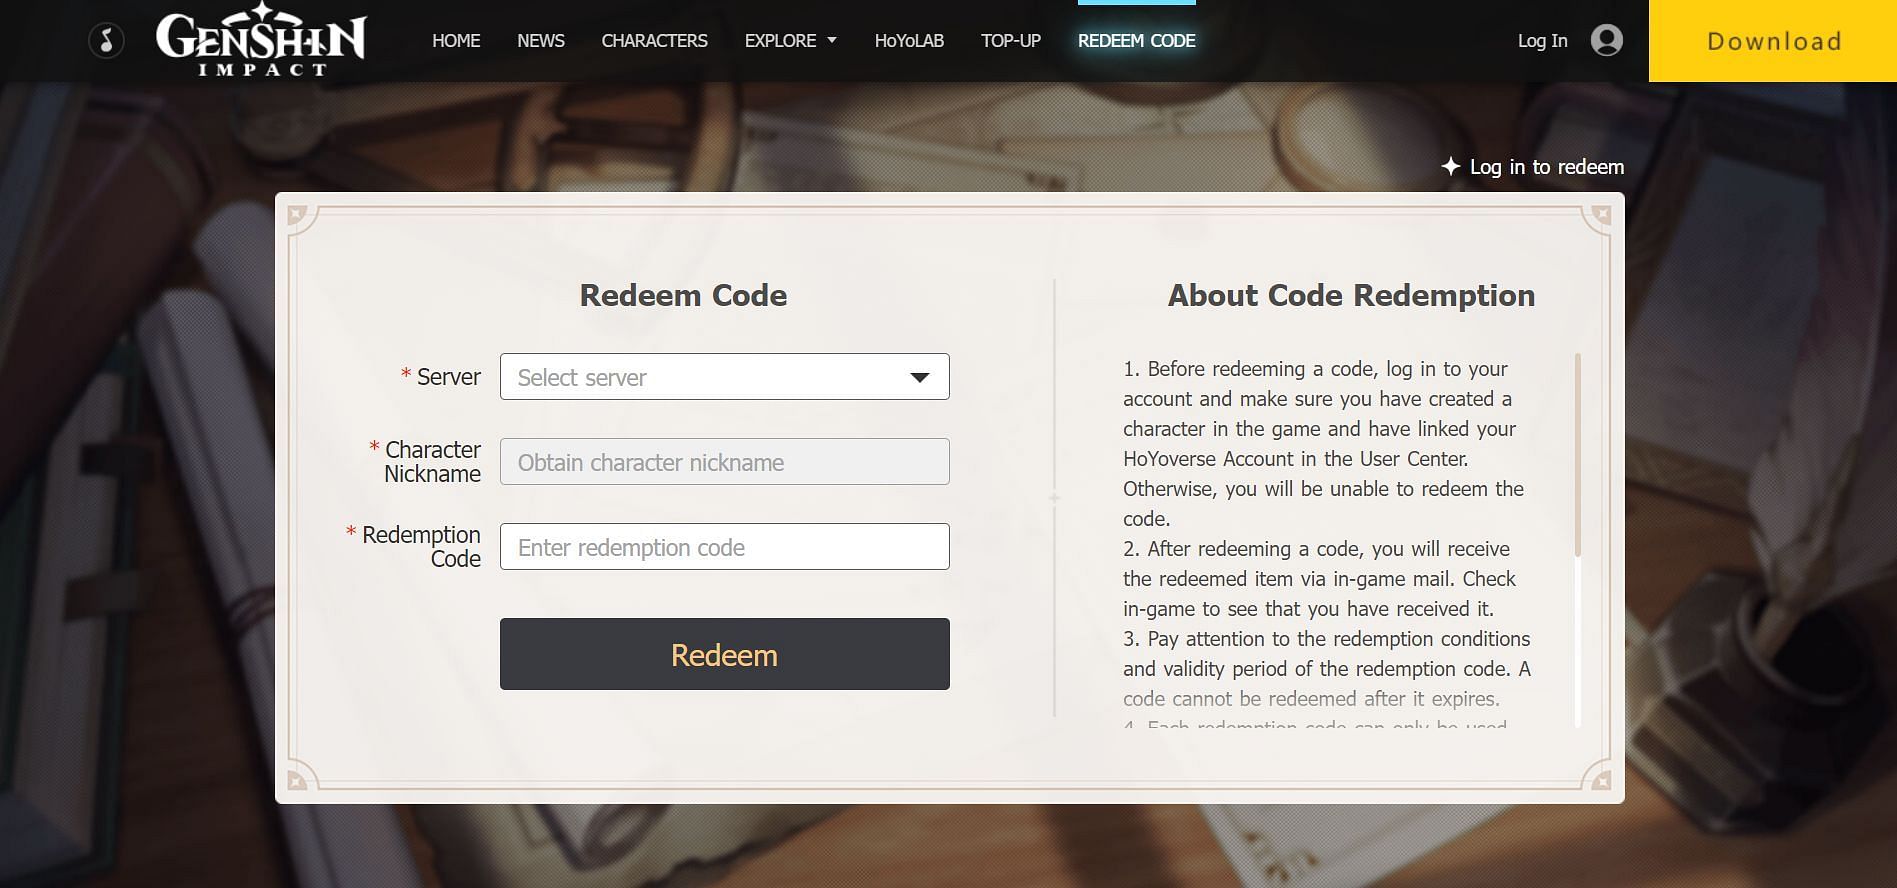 How to redeem codes on the official website (Image via HoYoverse)